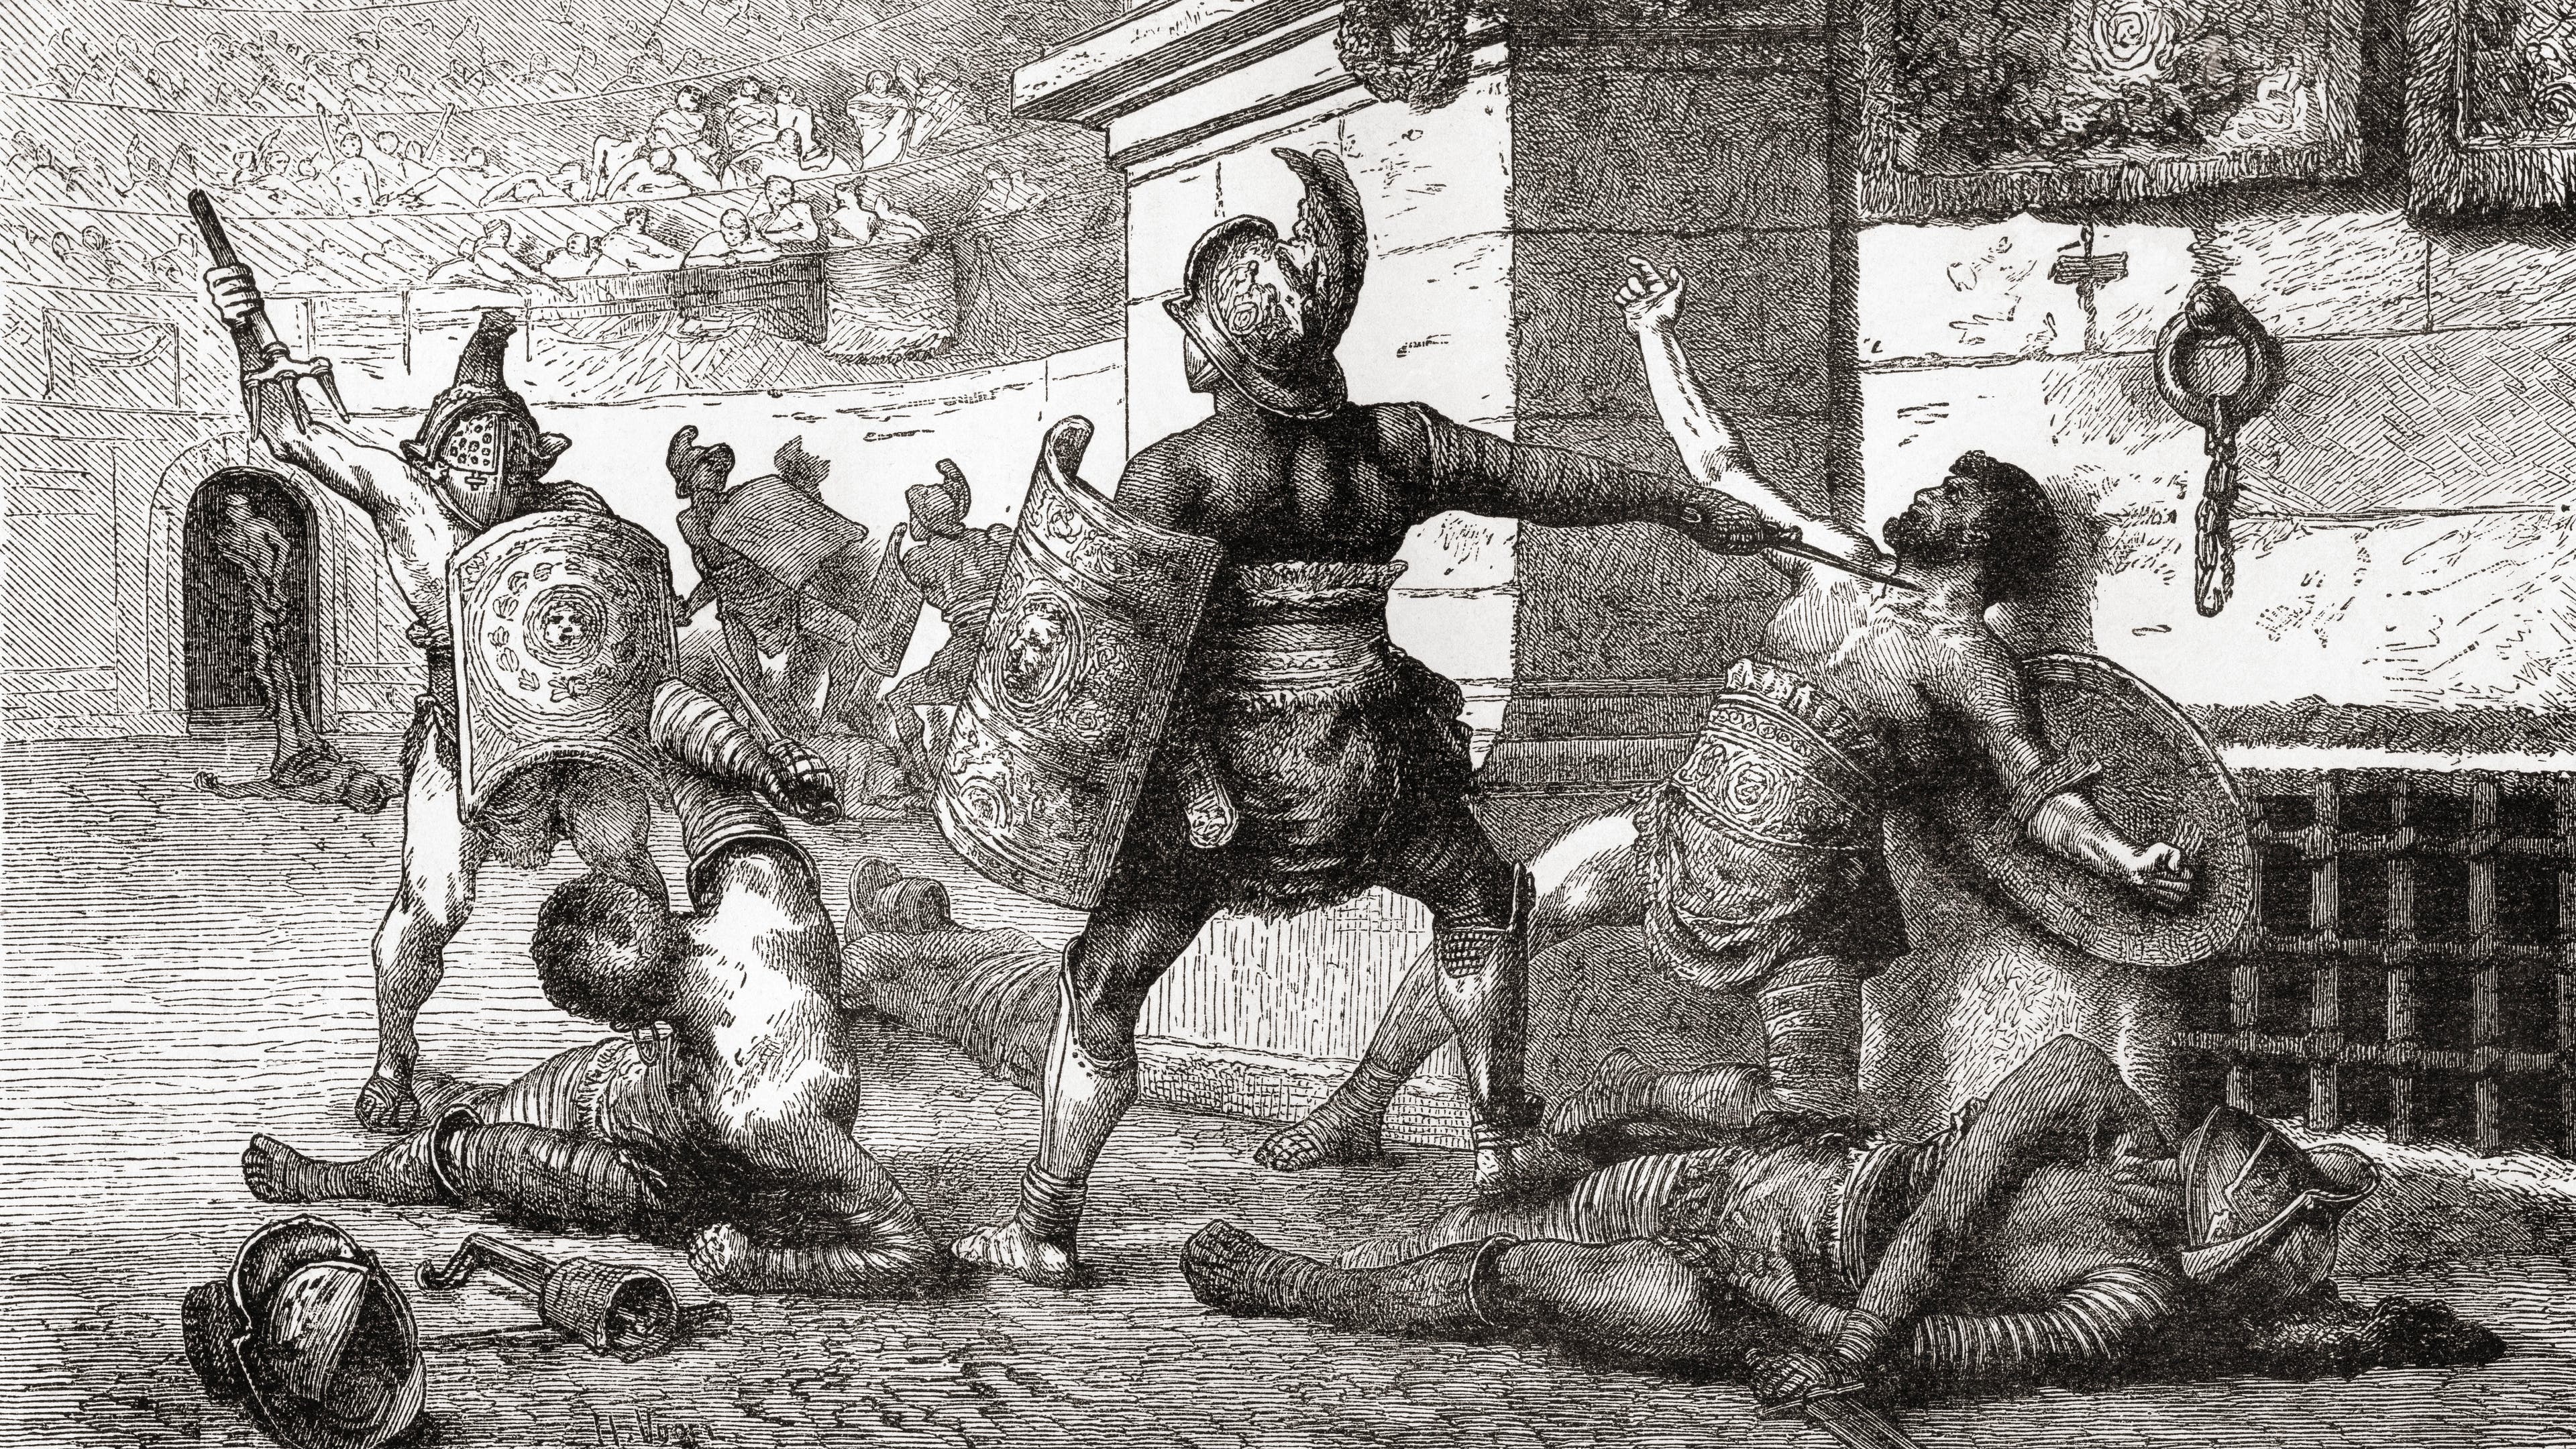 Combat between gladiators in ancient Rome. The vanquished appeals to the spectators for mercy. From Ward and Lock's Illustrated History of the World, published c. 1882.